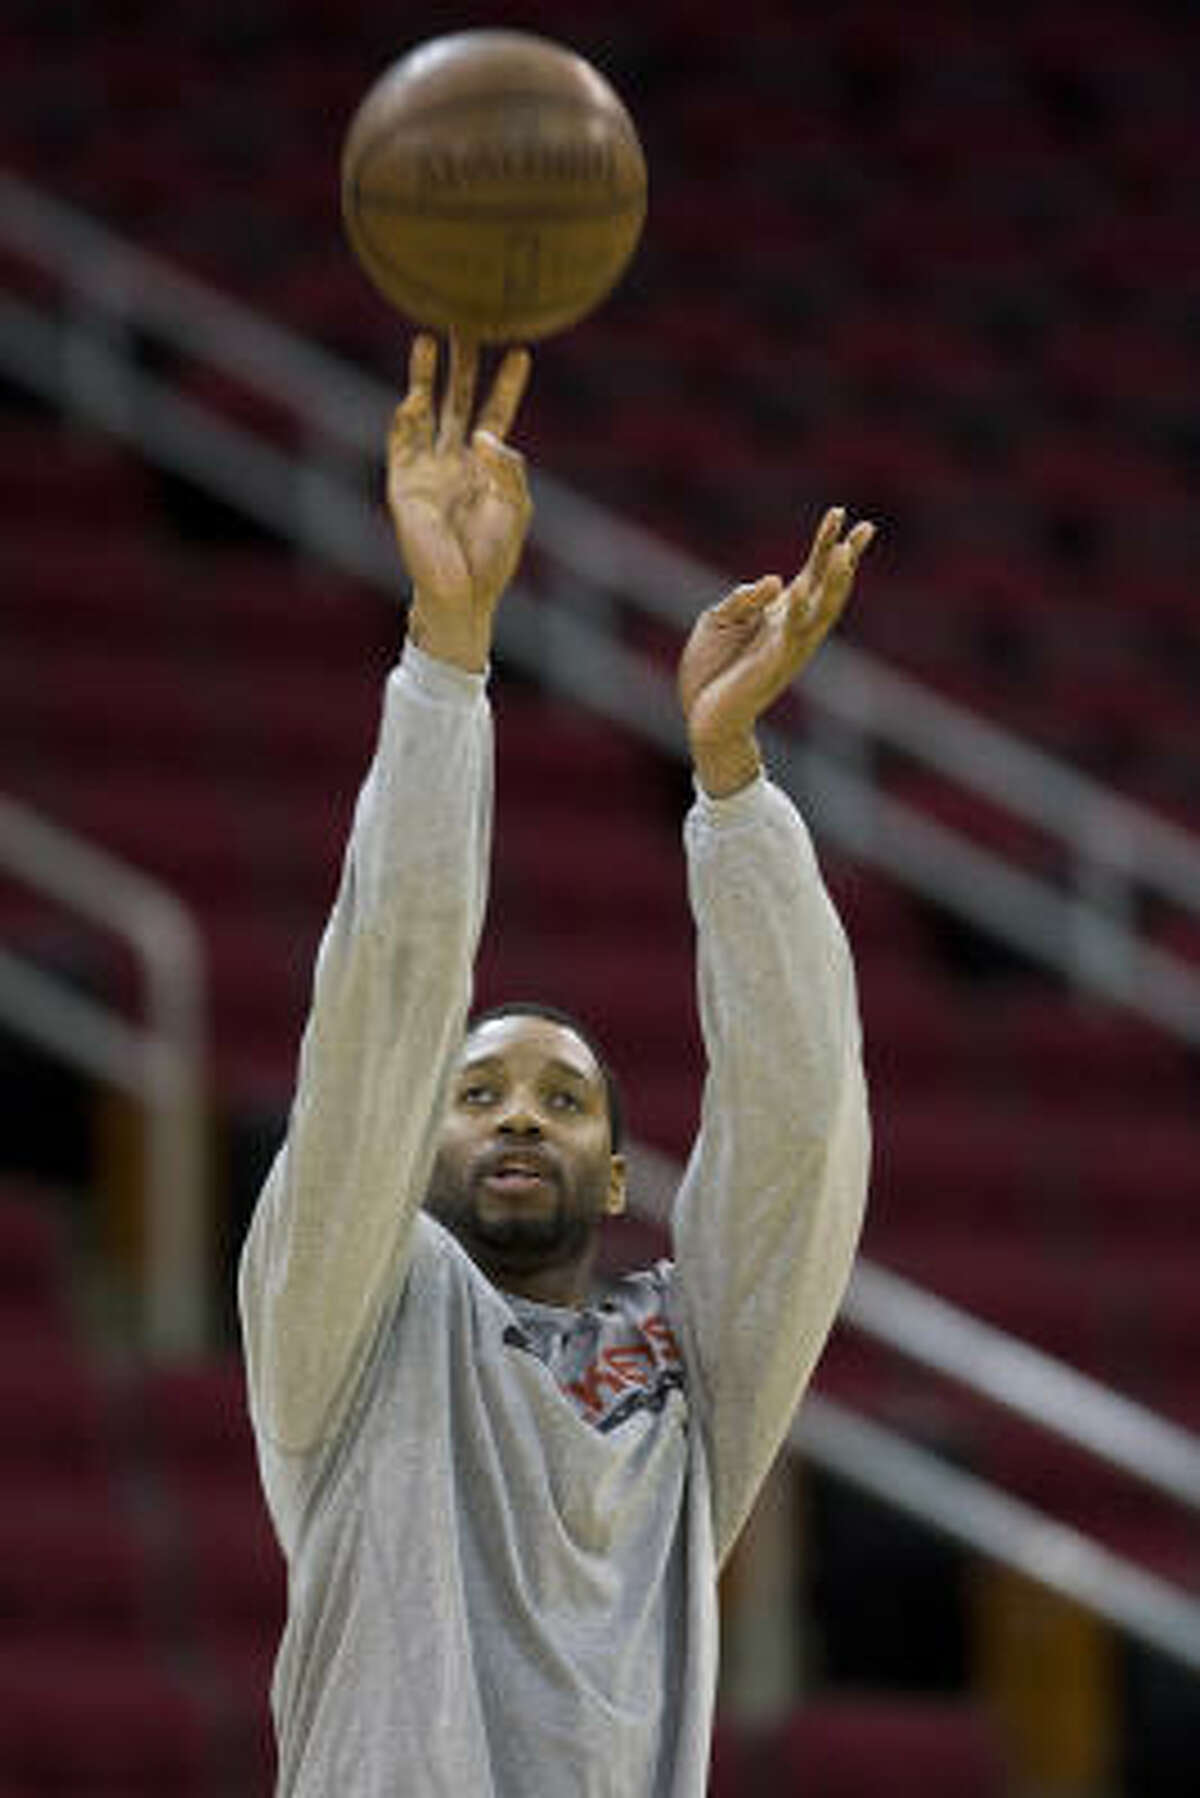 The Rockets still expect Tracy McGrady to be out at least until an MRI scheduled for Nov. 23.